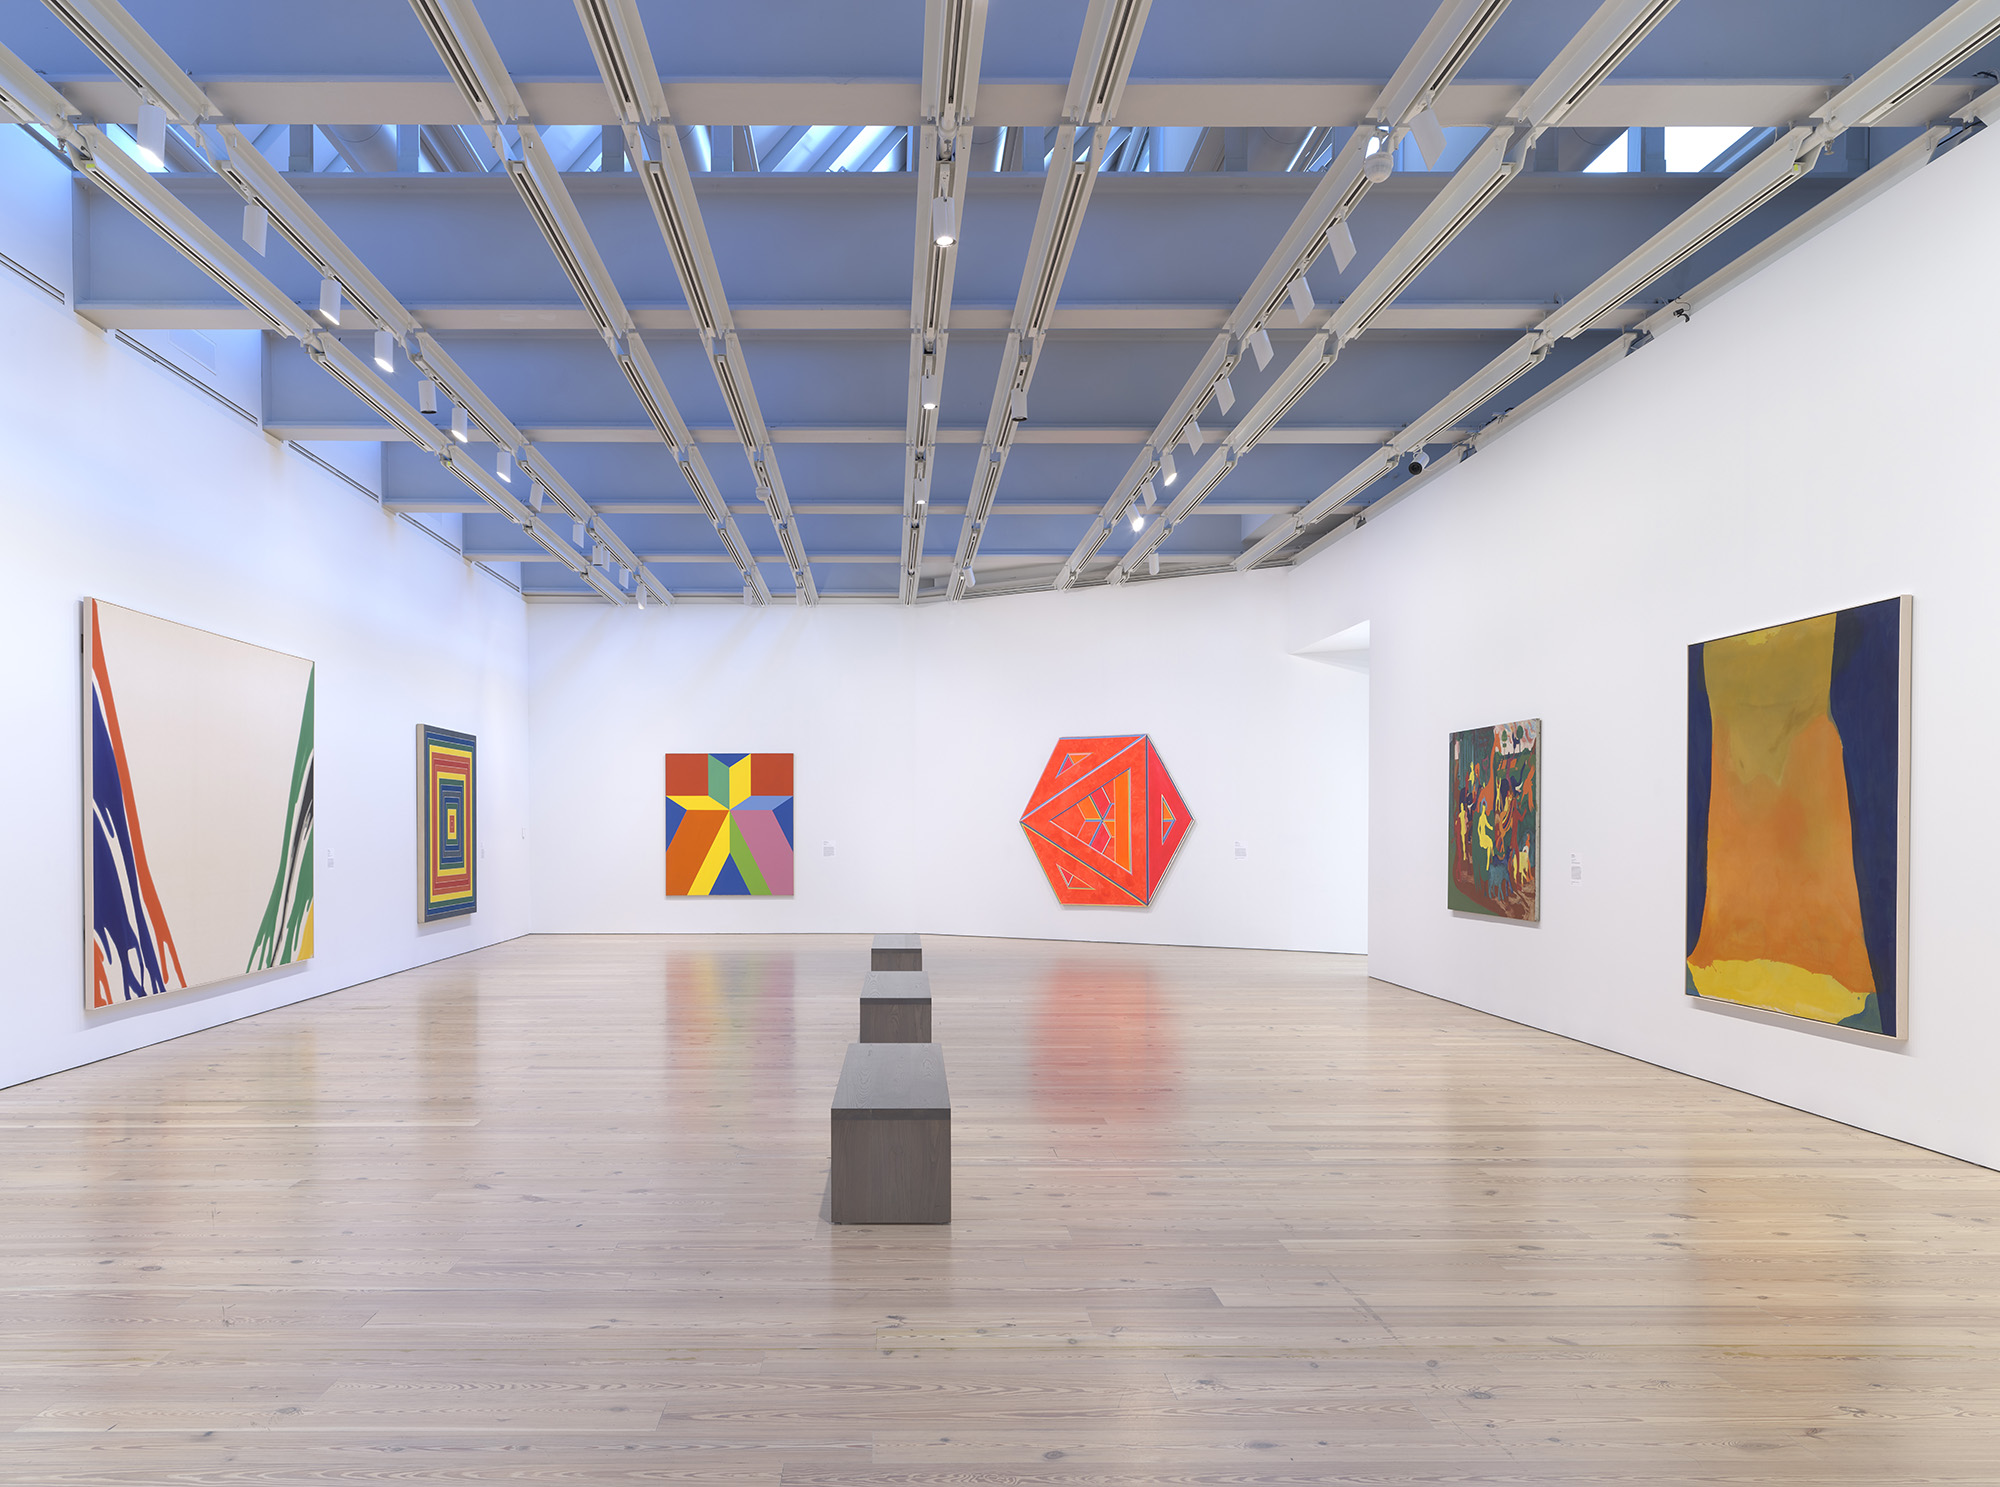  Installation view of  Spilling Over: Painting Color in the 1960s  (Whitney Museum of American Art, New York, March 29-August 2019). From left to right: Morris Louis,  Gamma Delta , 1959-60; Frank Stella,  Gran Cairo , 1962; Miriam Schapiro,  Jigsaw 